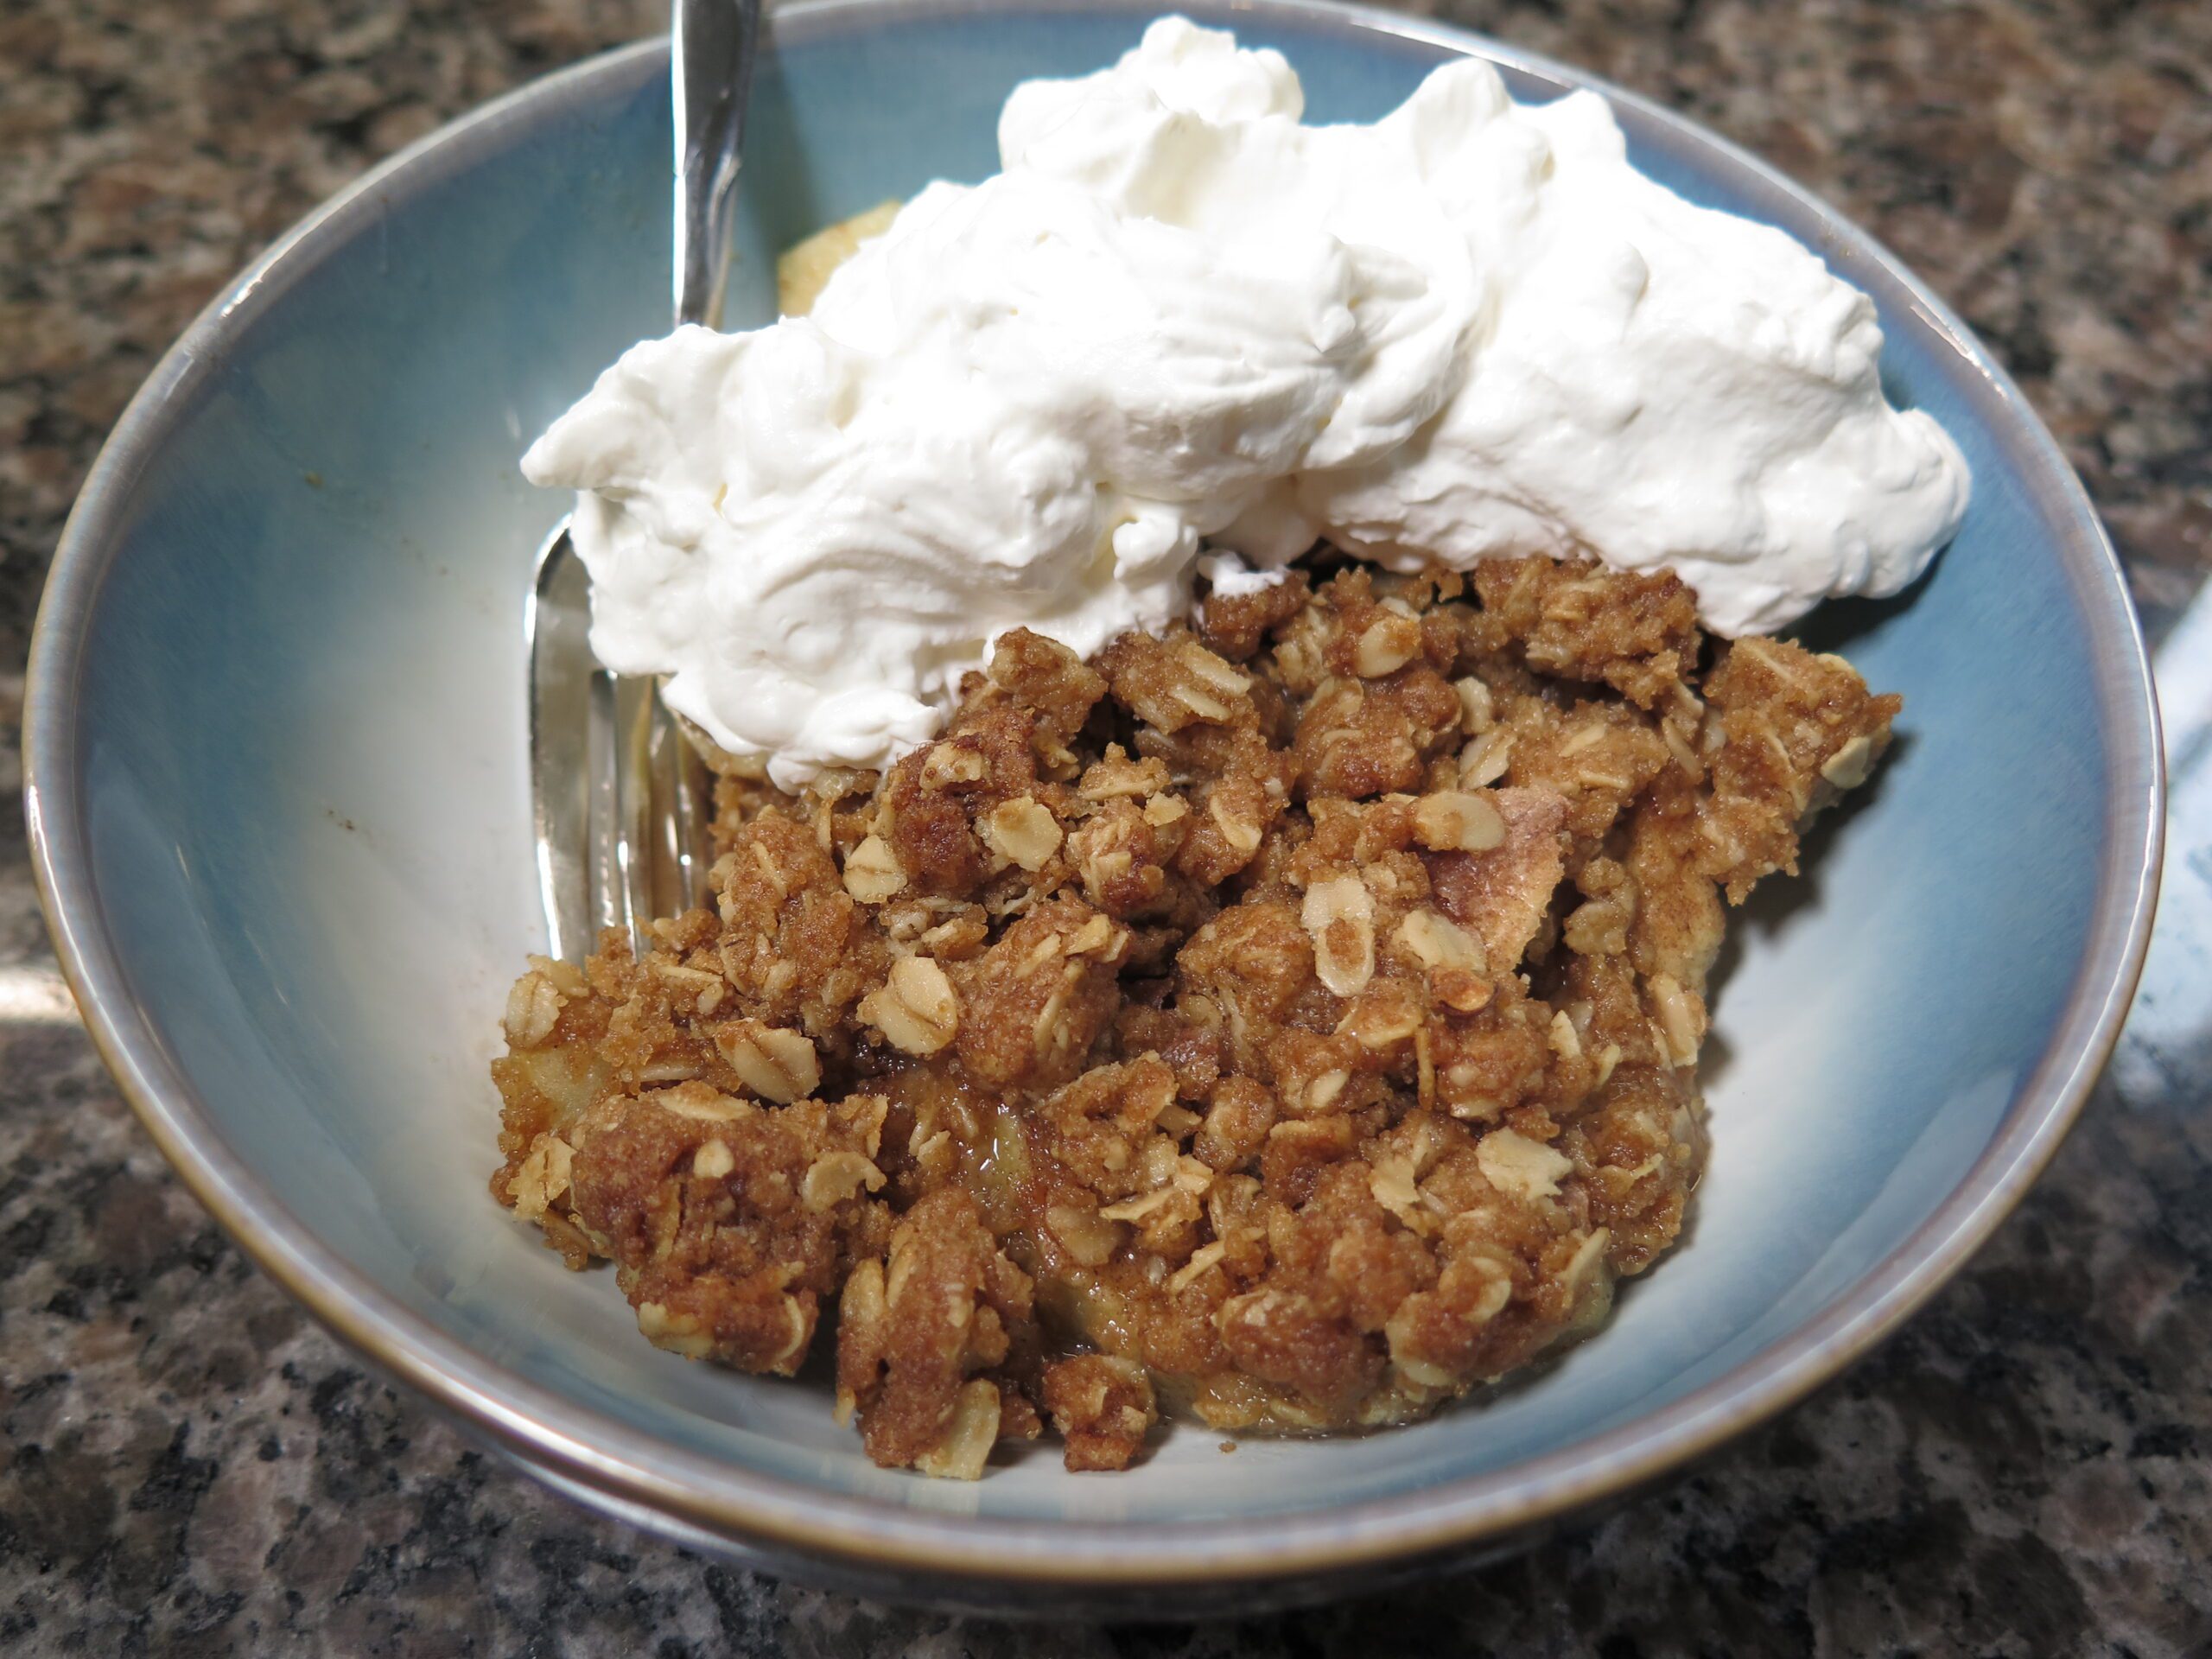 Bowl of apple crisp with whipped cream